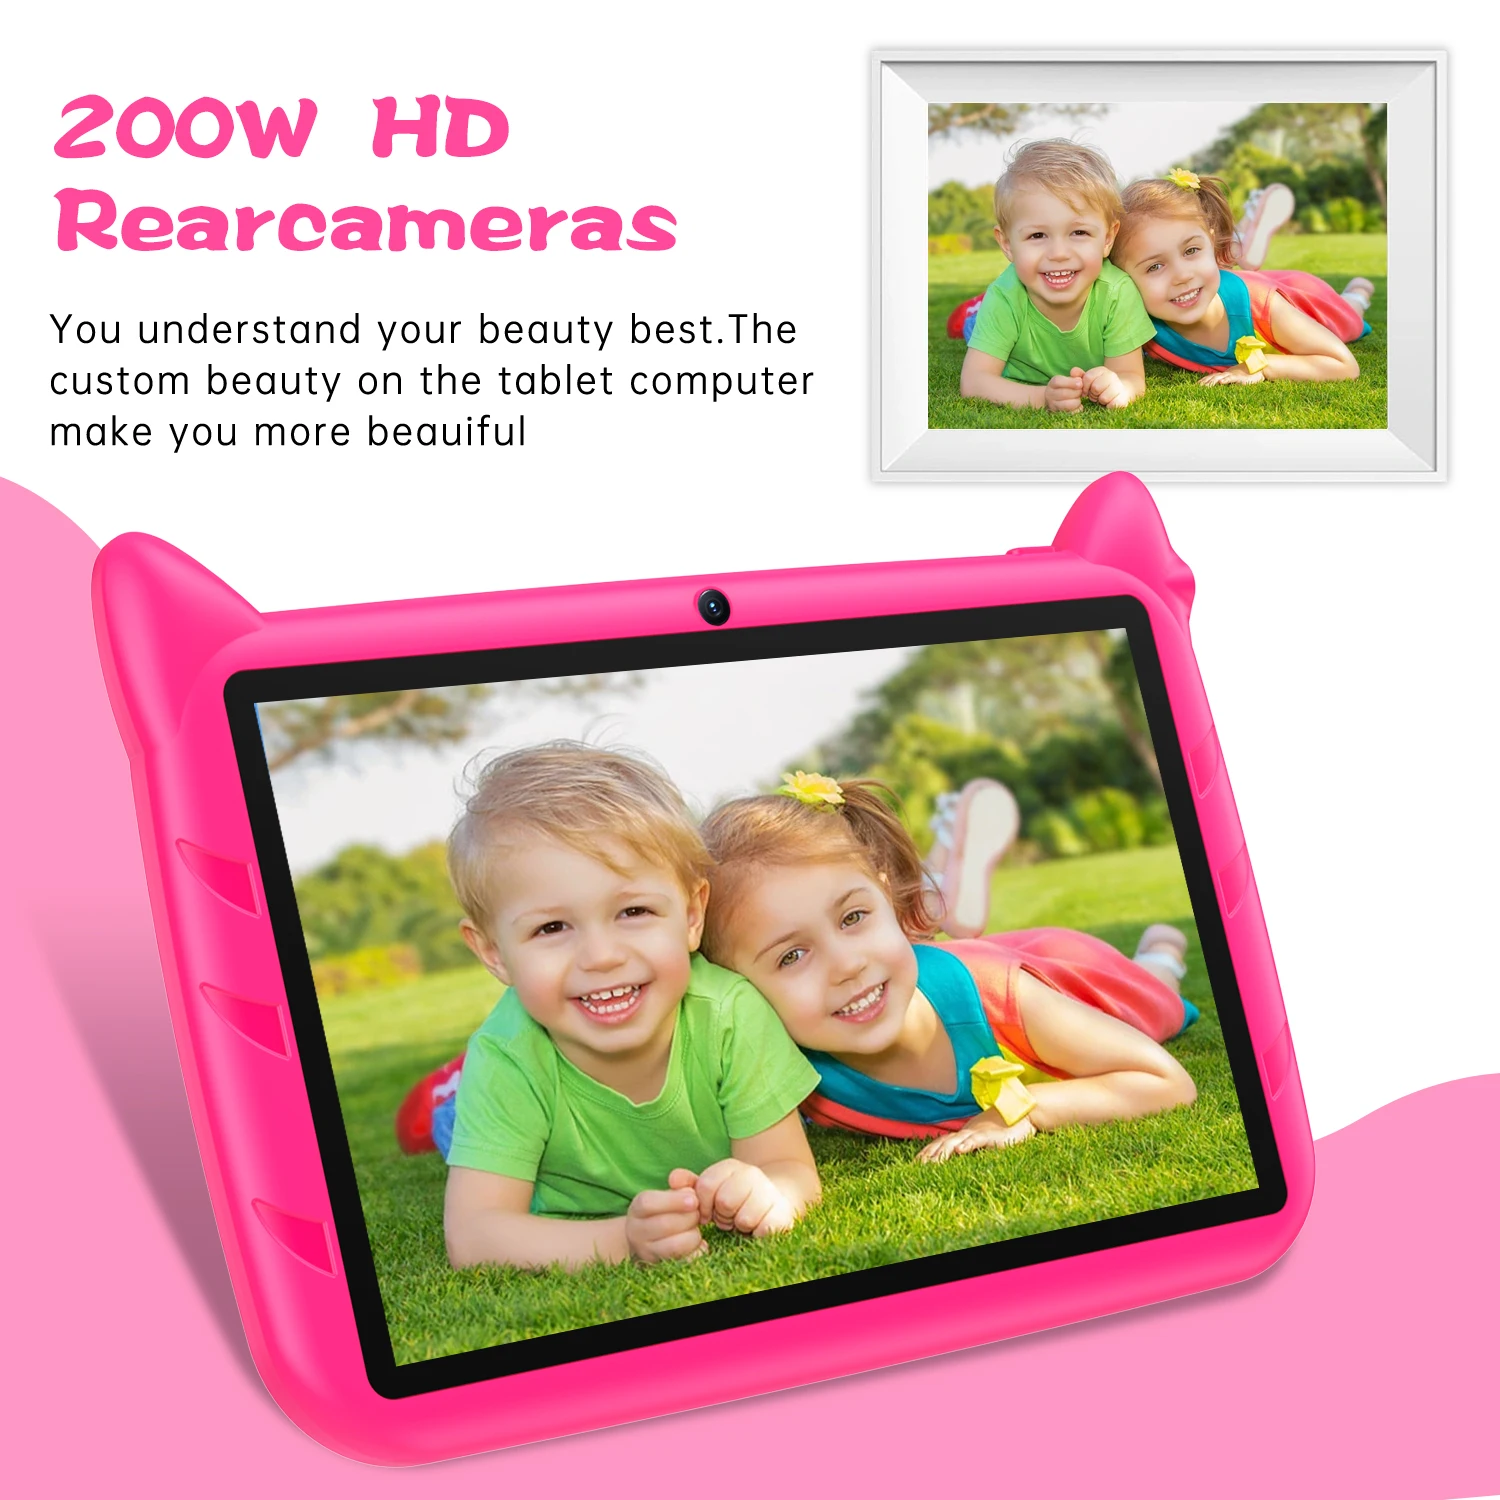 Q80 Sauenane 2GB/32GB cheap Kids Tablet 7 Inch  Cheap Quad Core Android 9.0  Children's Gift 5G WiFi Tablet Pc Tab 8 inch tablets cheap children s gift kids learning education android tablet quad core 2gb ram 32gb rom wifi tablet pc